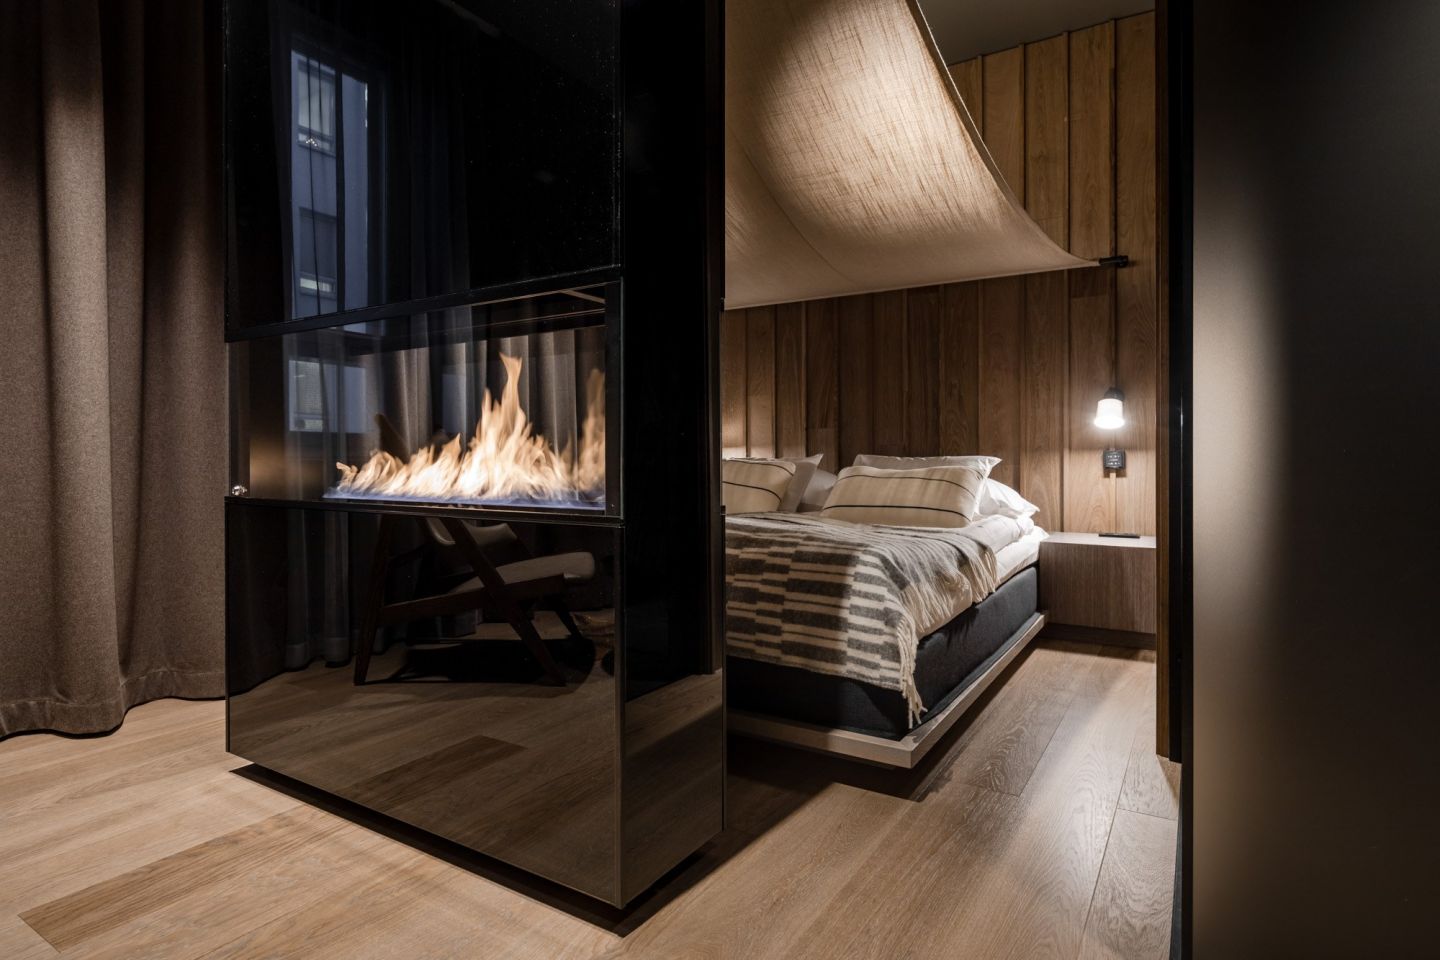 Haawe boutique hotel in Rovaniemi, Finland, a special summer accommodation in Lapland